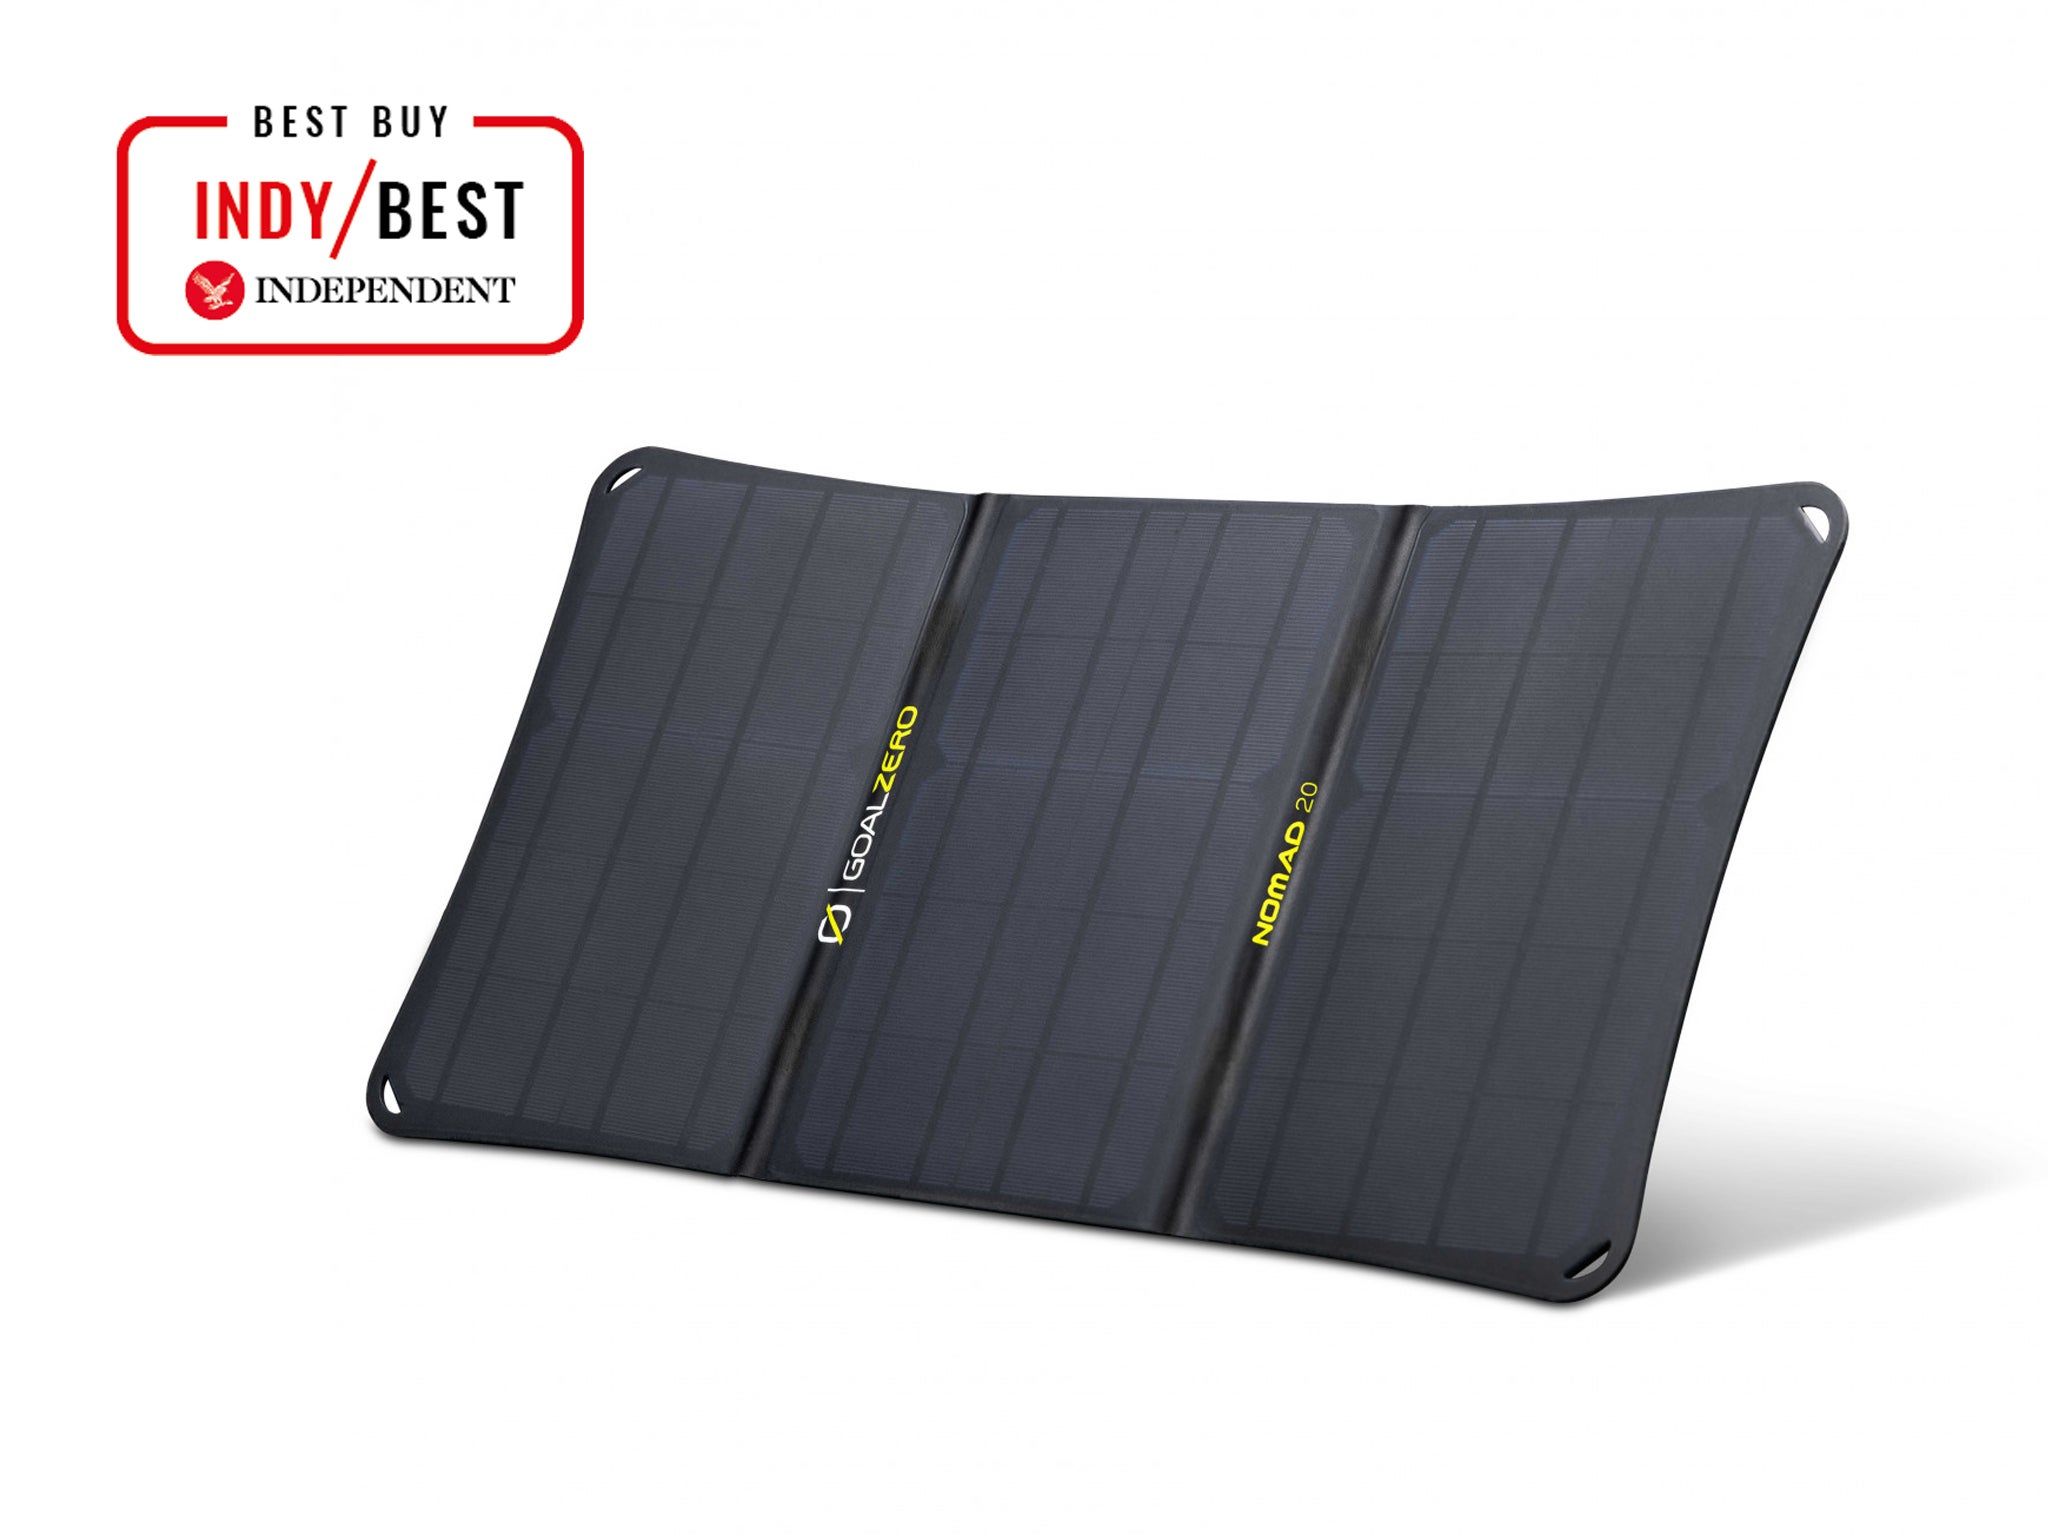 goal zero nomad 20 solar charger with best buy logo